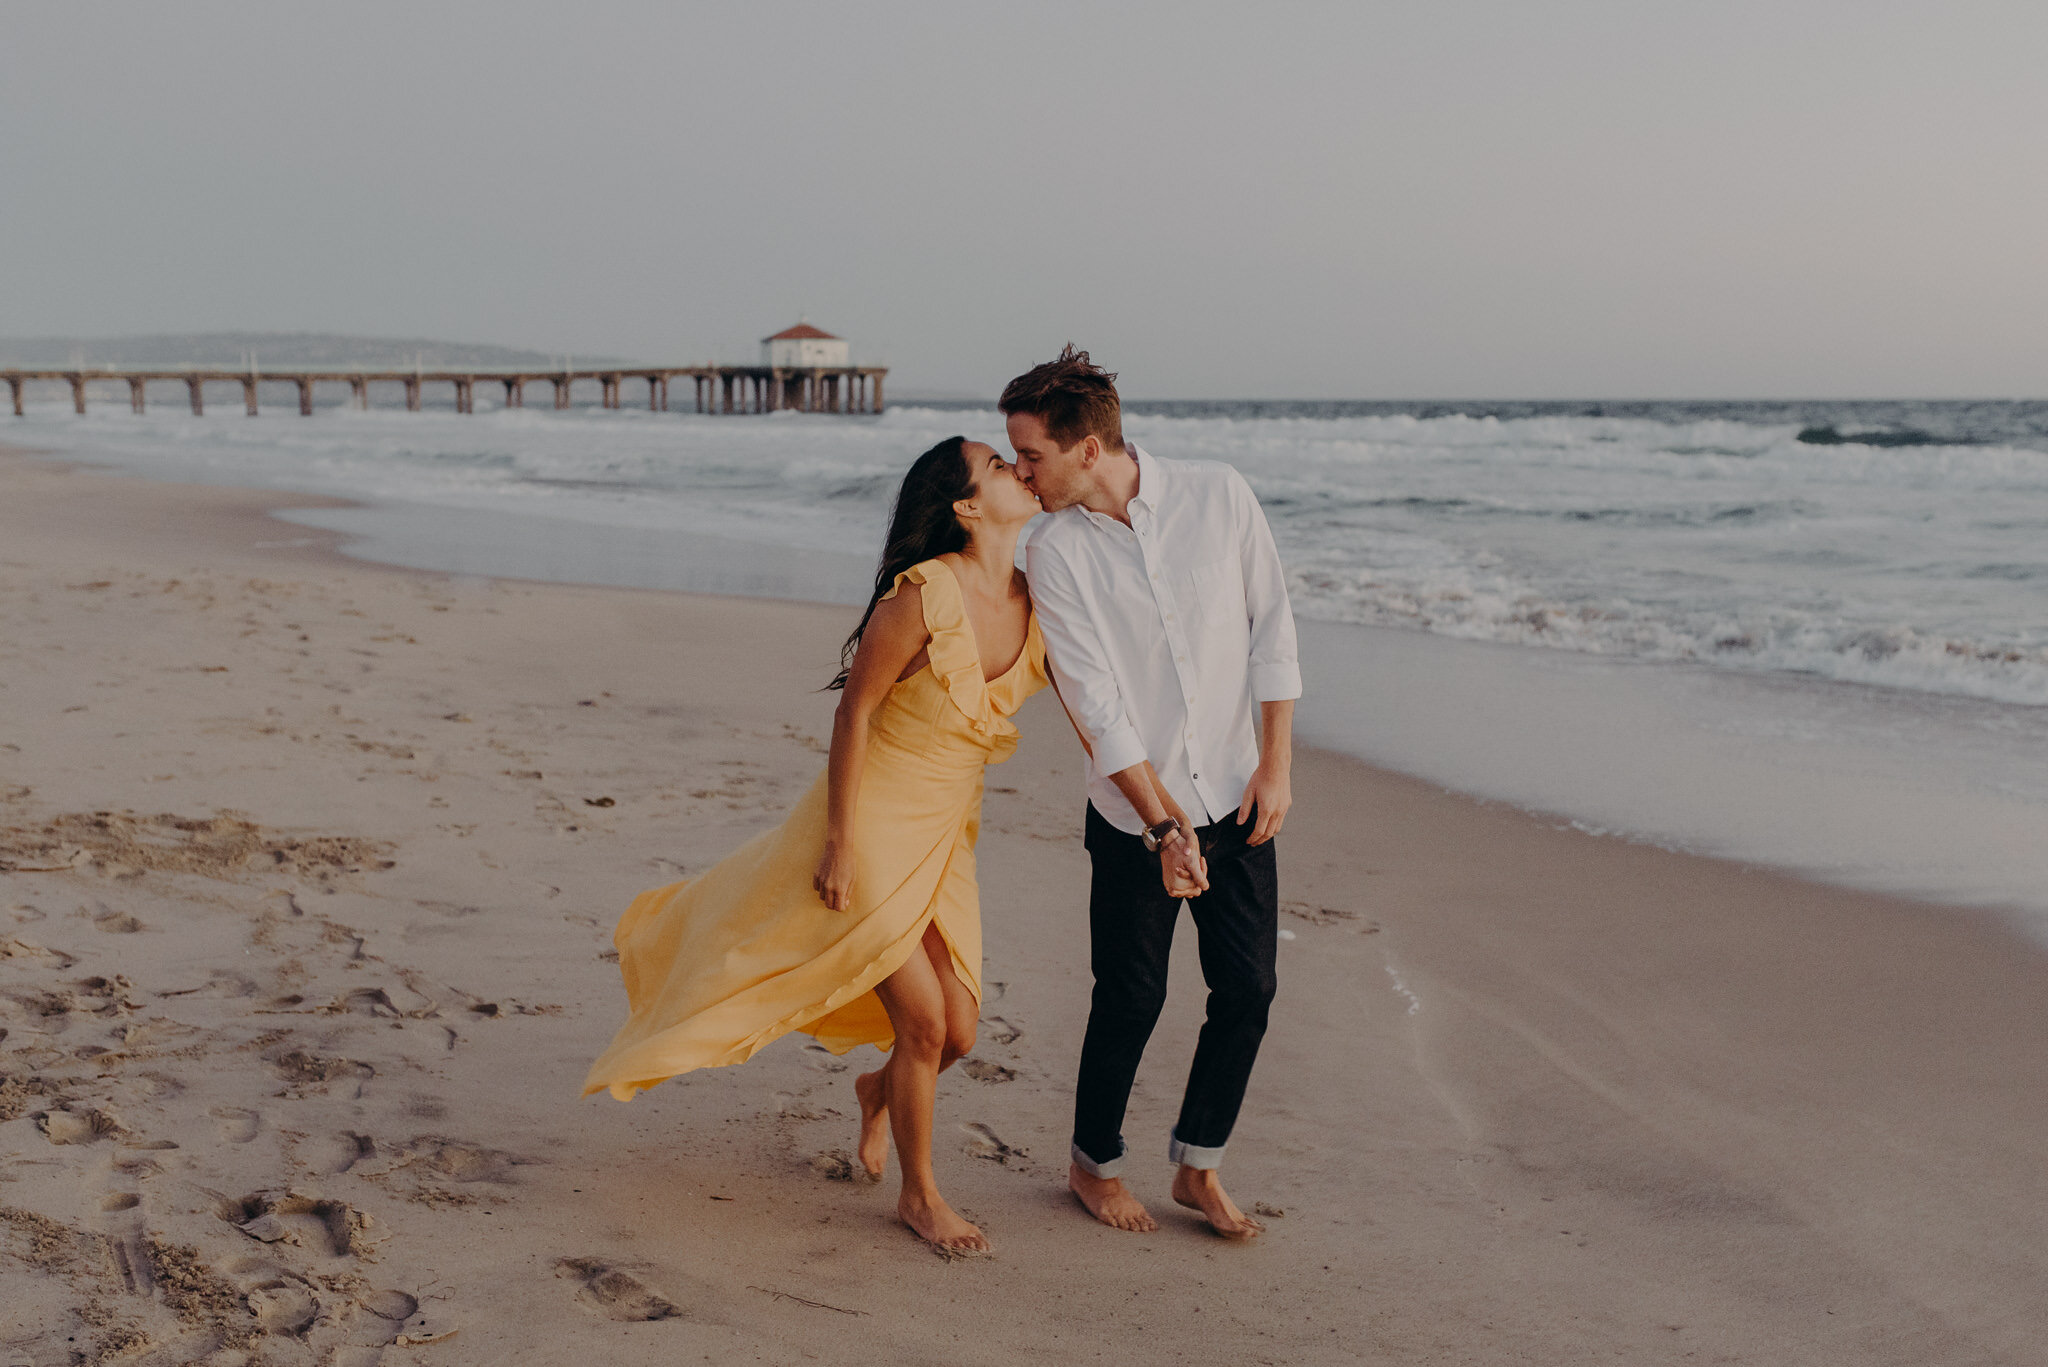 los angeles in-home engagement session - manhattan beach - isaiahandtaylor.com-042.jpg